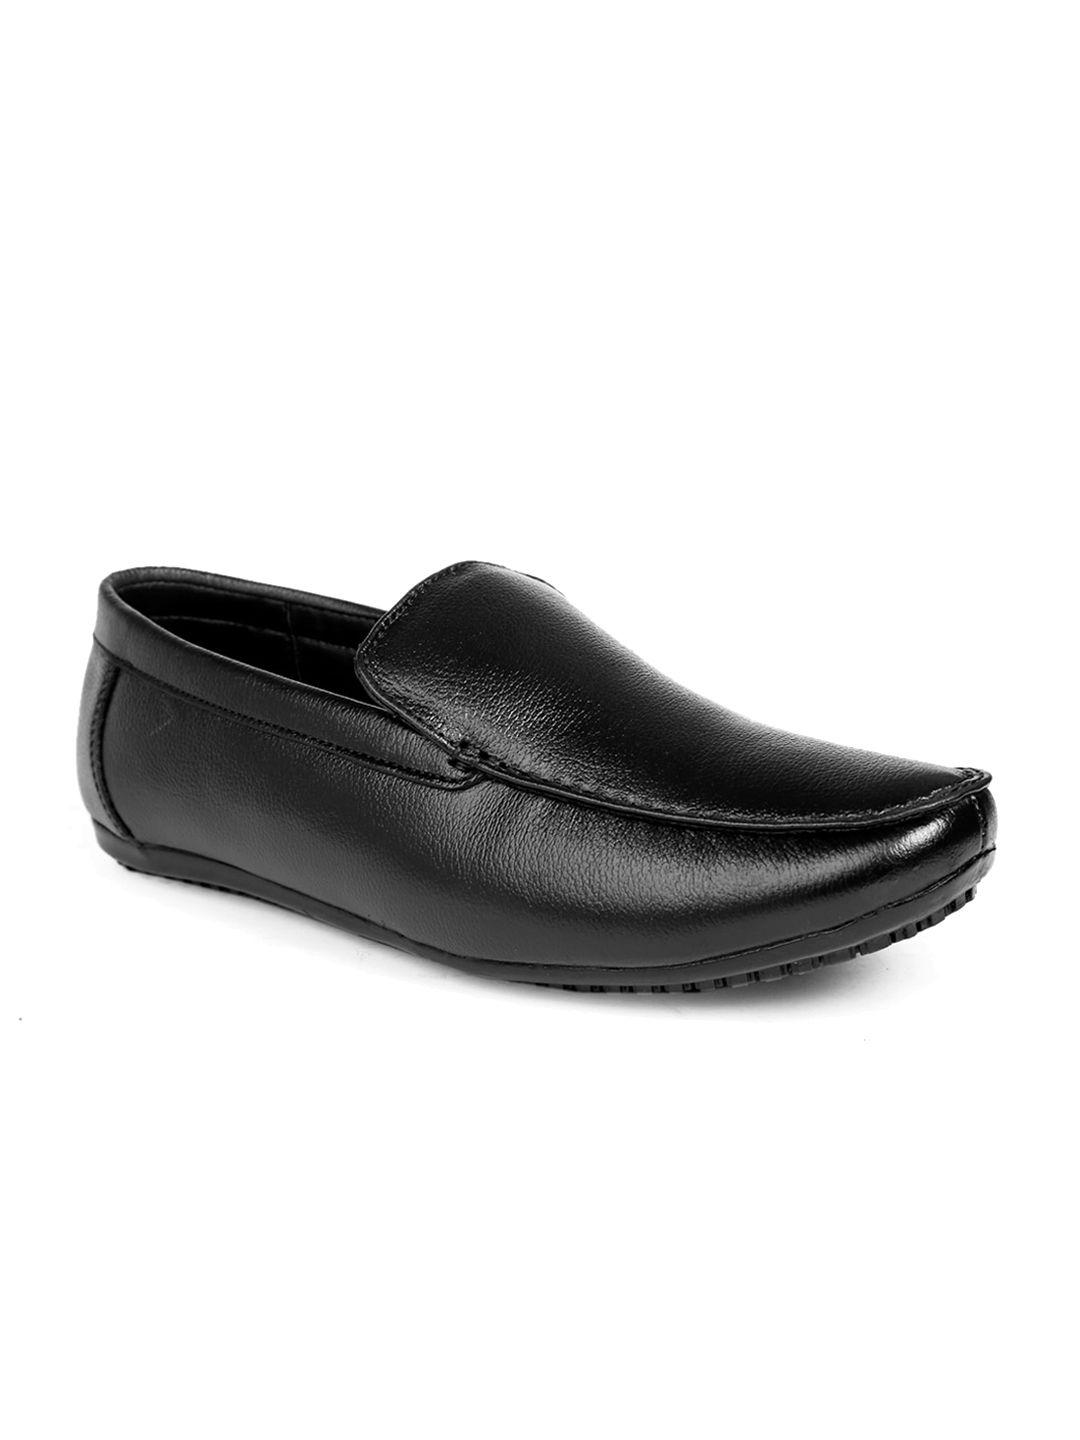 bxxy men textured leather formal slip on shoes